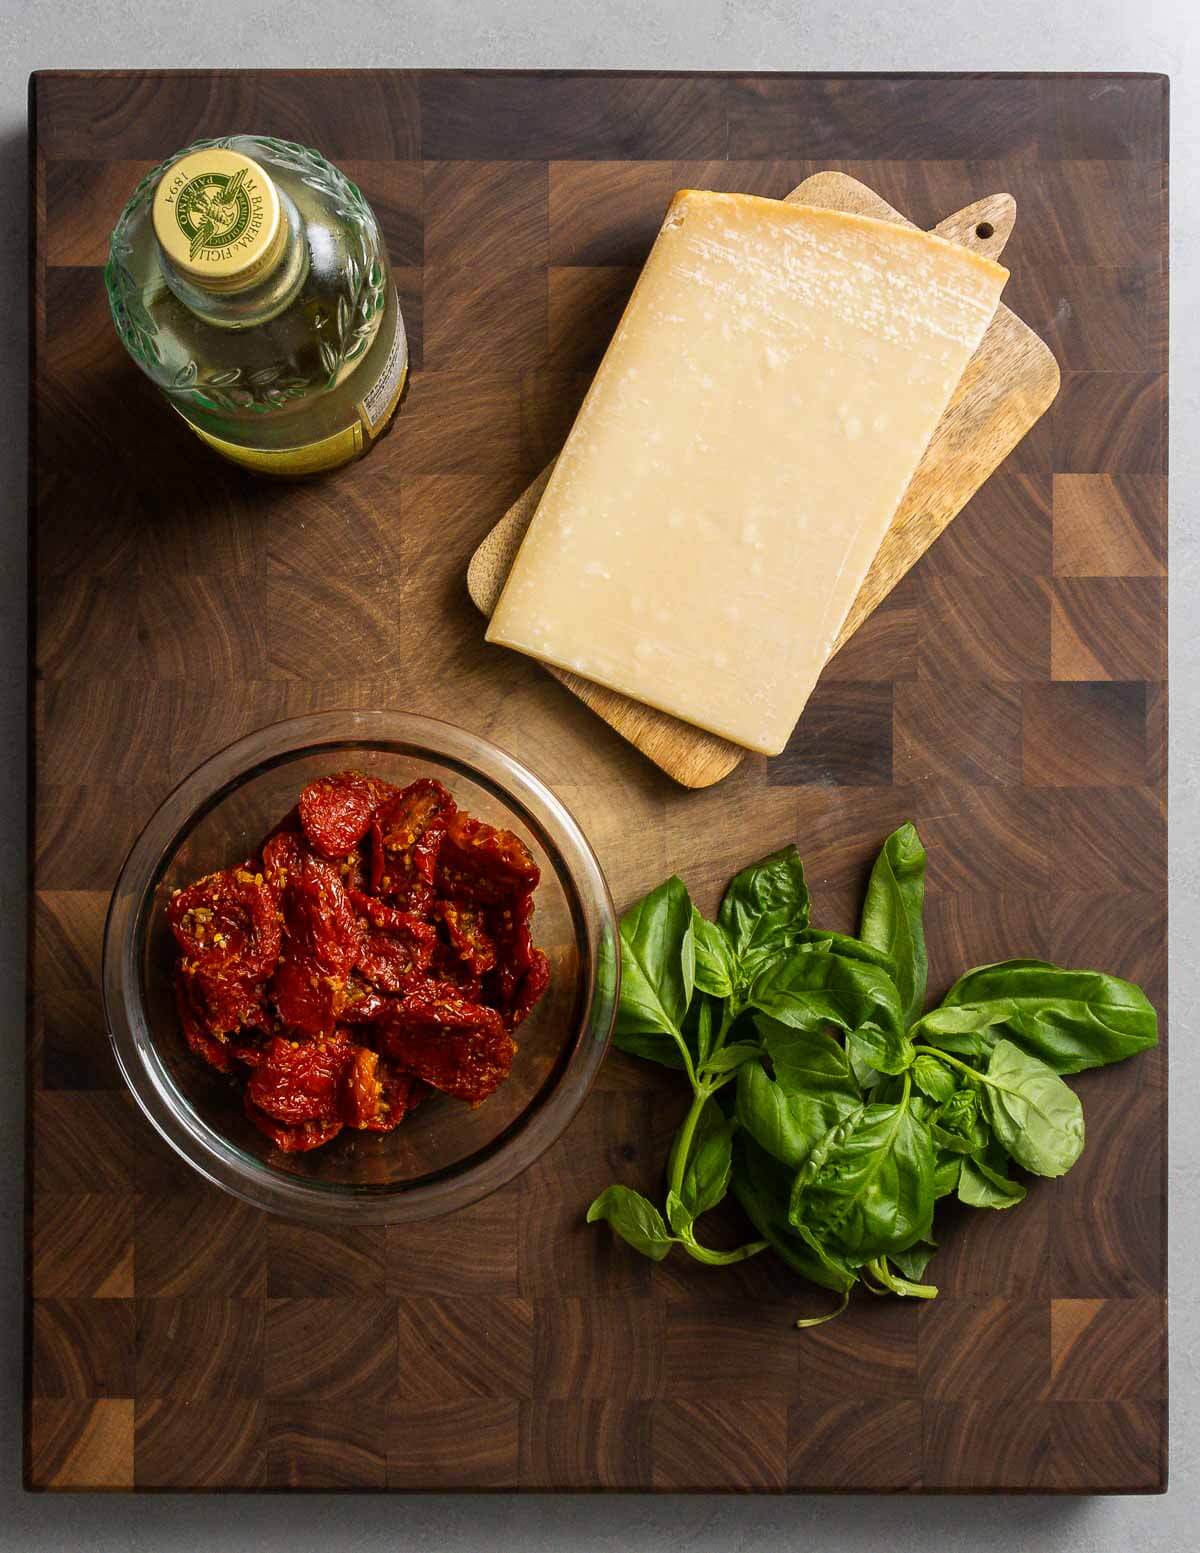 Ingredients shown: extra virgin olive oil, Parmigiano Reggiano, sun dried tomatoes, and basil.